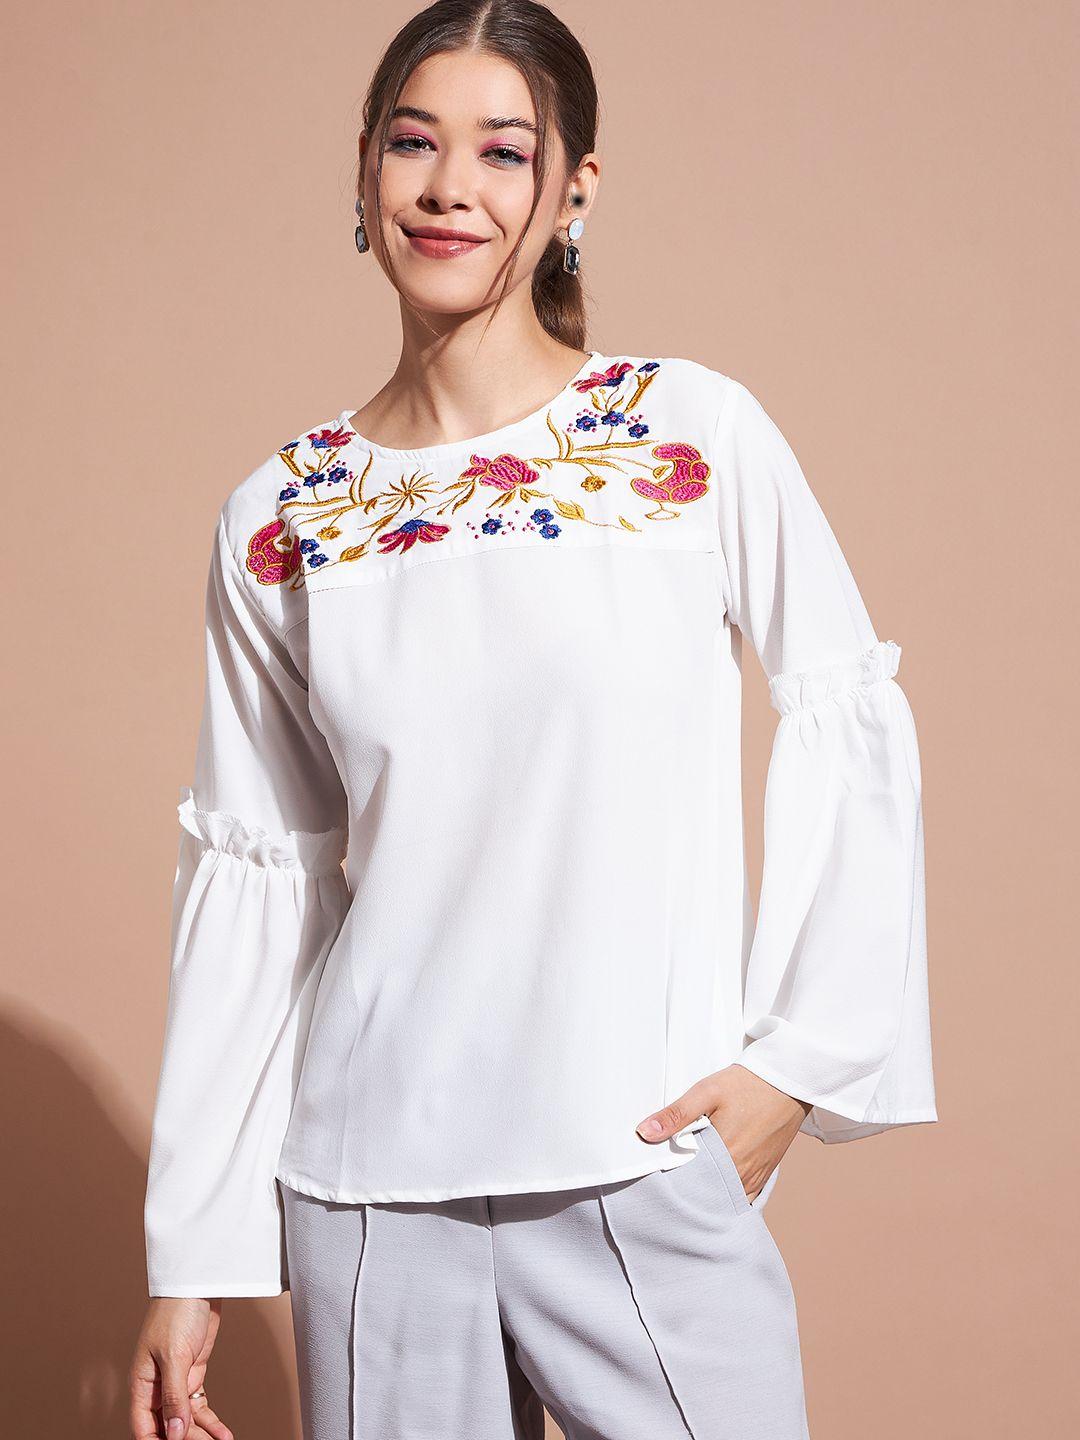 dressberry-white-floral-embroidered-bell-sleeves-top